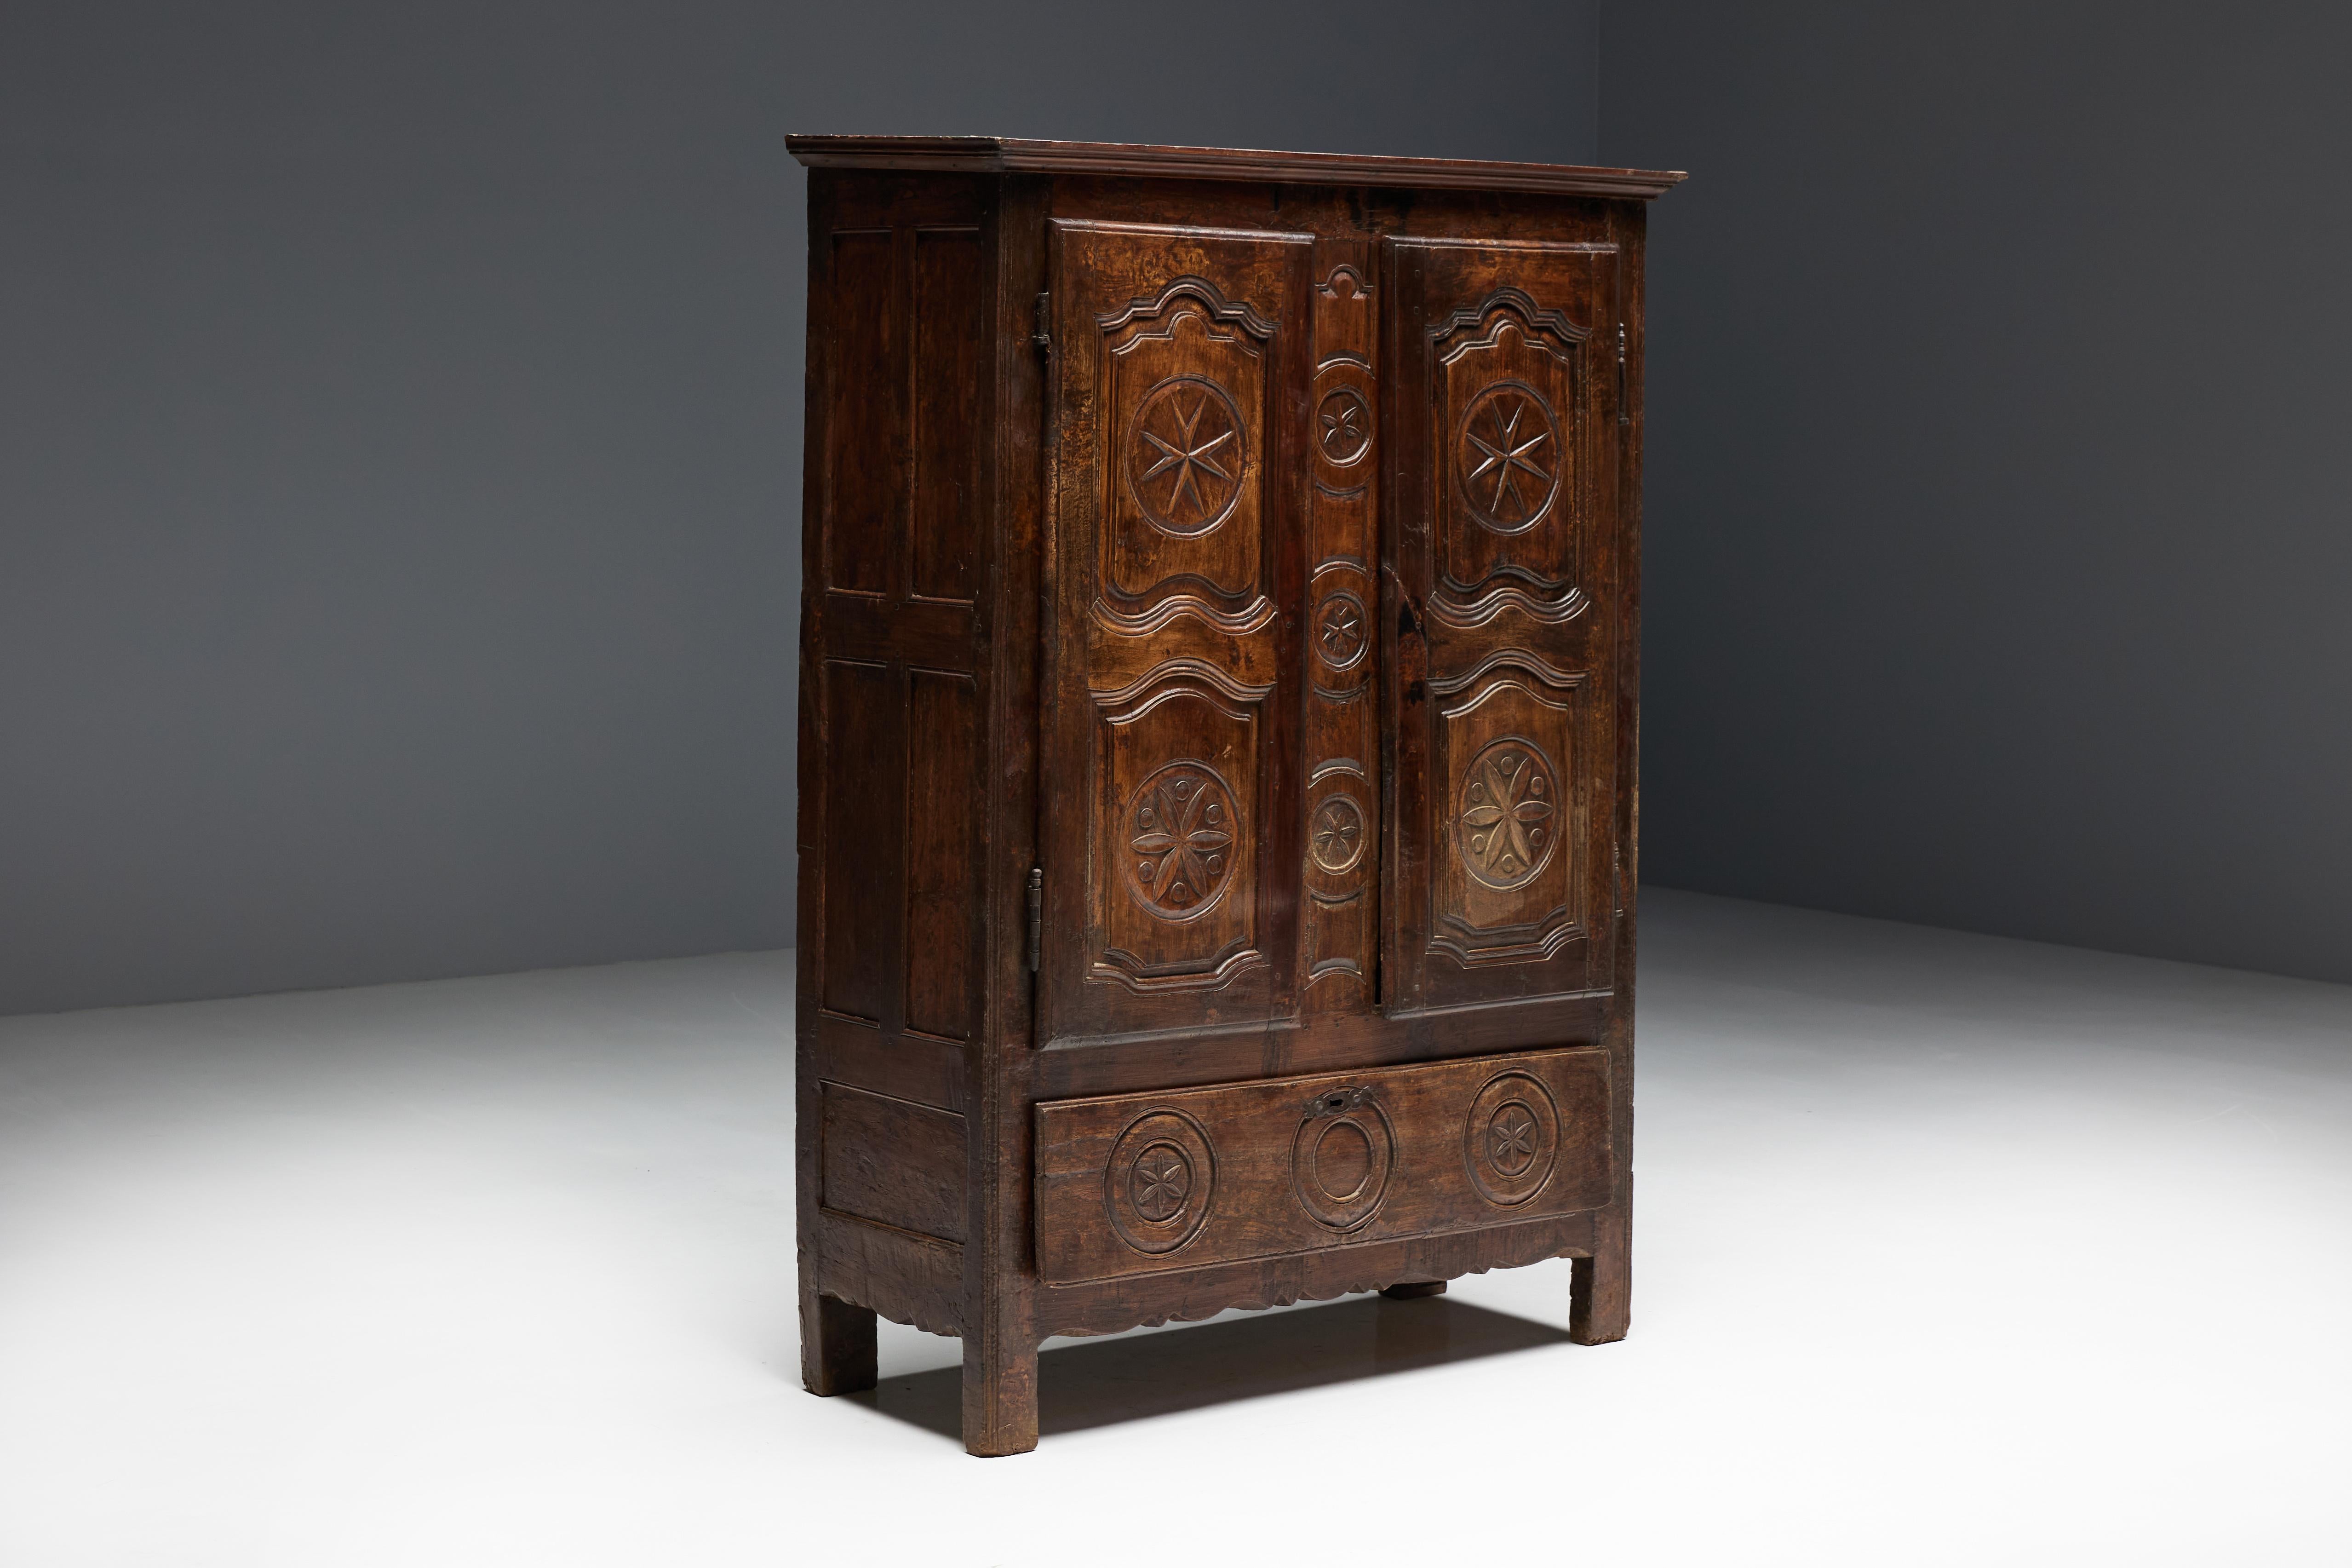 19th-century art popular cabinet, a timeless masterpiece crafted from rich, dark solid wood with unparalleled craftsmanship. Beautiful details carved into the wood showcase the impeccable craftsmanship of that period, making this cabinet a beautiful